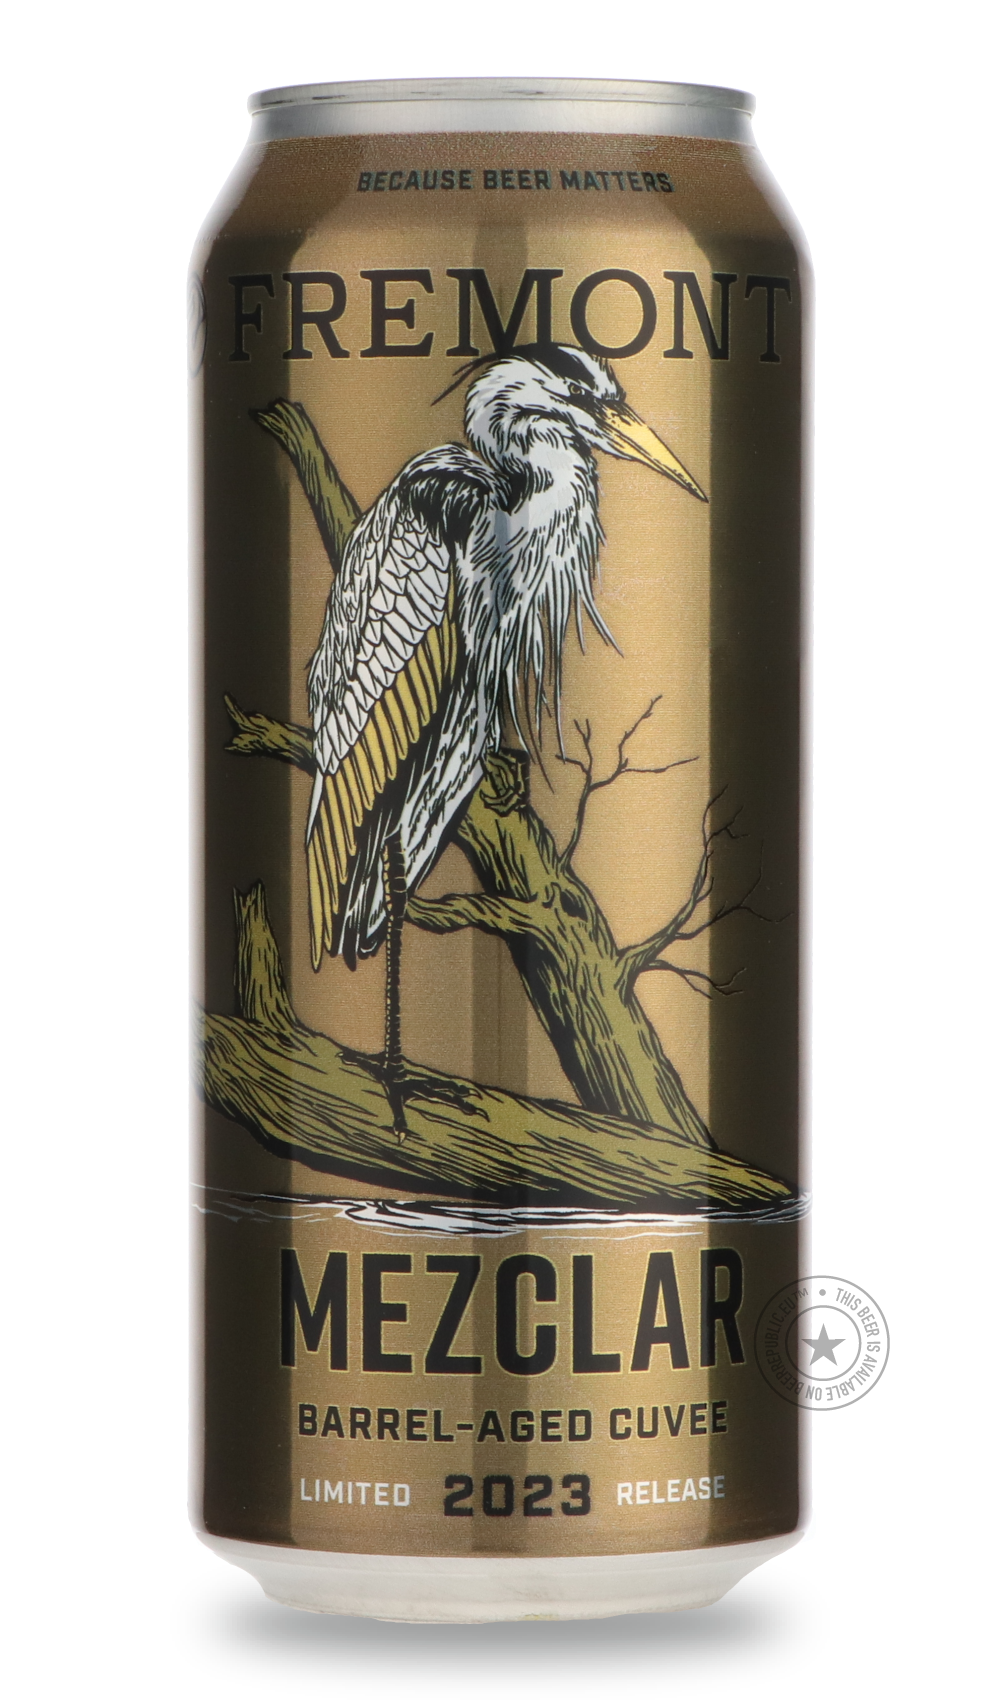 -Fremont- Mezclar – Barrel-Aged Cuvee (2023)-Stout & Porter- Only @ Beer Republic - The best online beer store for American & Canadian craft beer - Buy beer online from the USA and Canada - Bier online kopen - Amerikaans bier kopen - Craft beer store - Craft beer kopen - Amerikanisch bier kaufen - Bier online kaufen - Acheter biere online - IPA - Stout - Porter - New England IPA - Hazy IPA - Imperial Stout - Barrel Aged - Barrel Aged Imperial Stout - Brown - Dark beer - Blond - Blonde - Pilsner - Lager - Wh